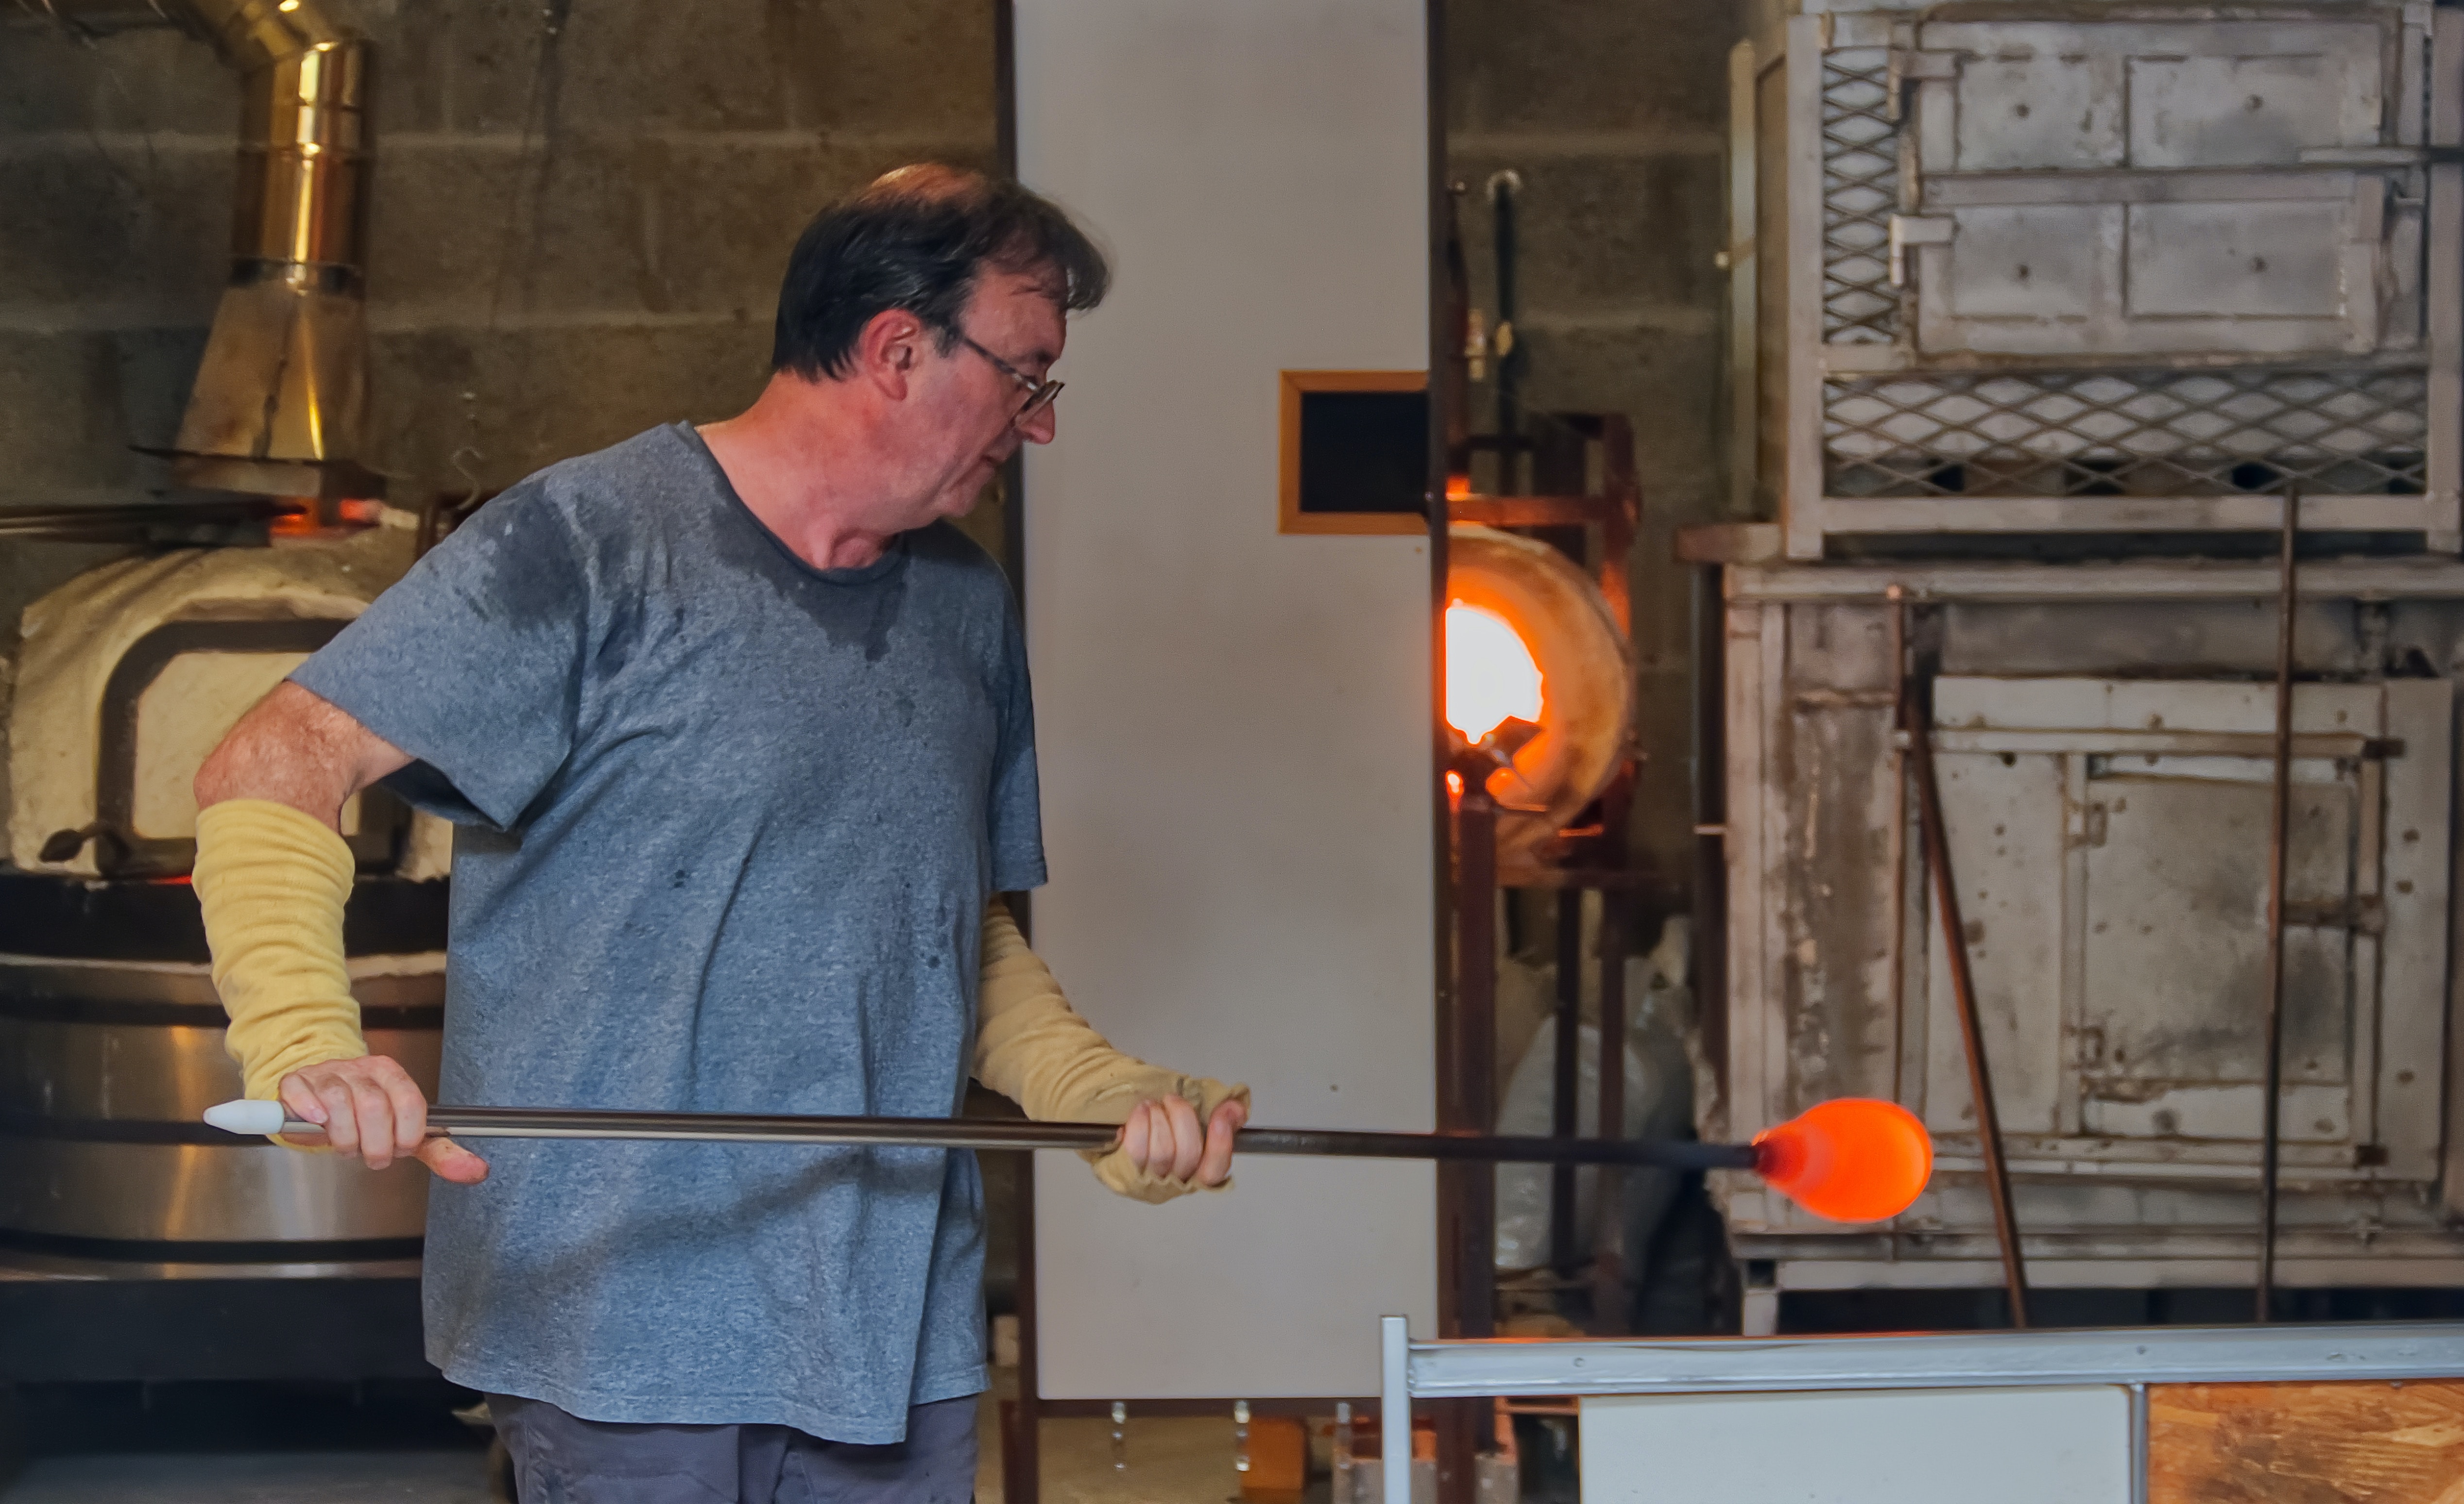 How to Glassblow Cutting & Polishing 